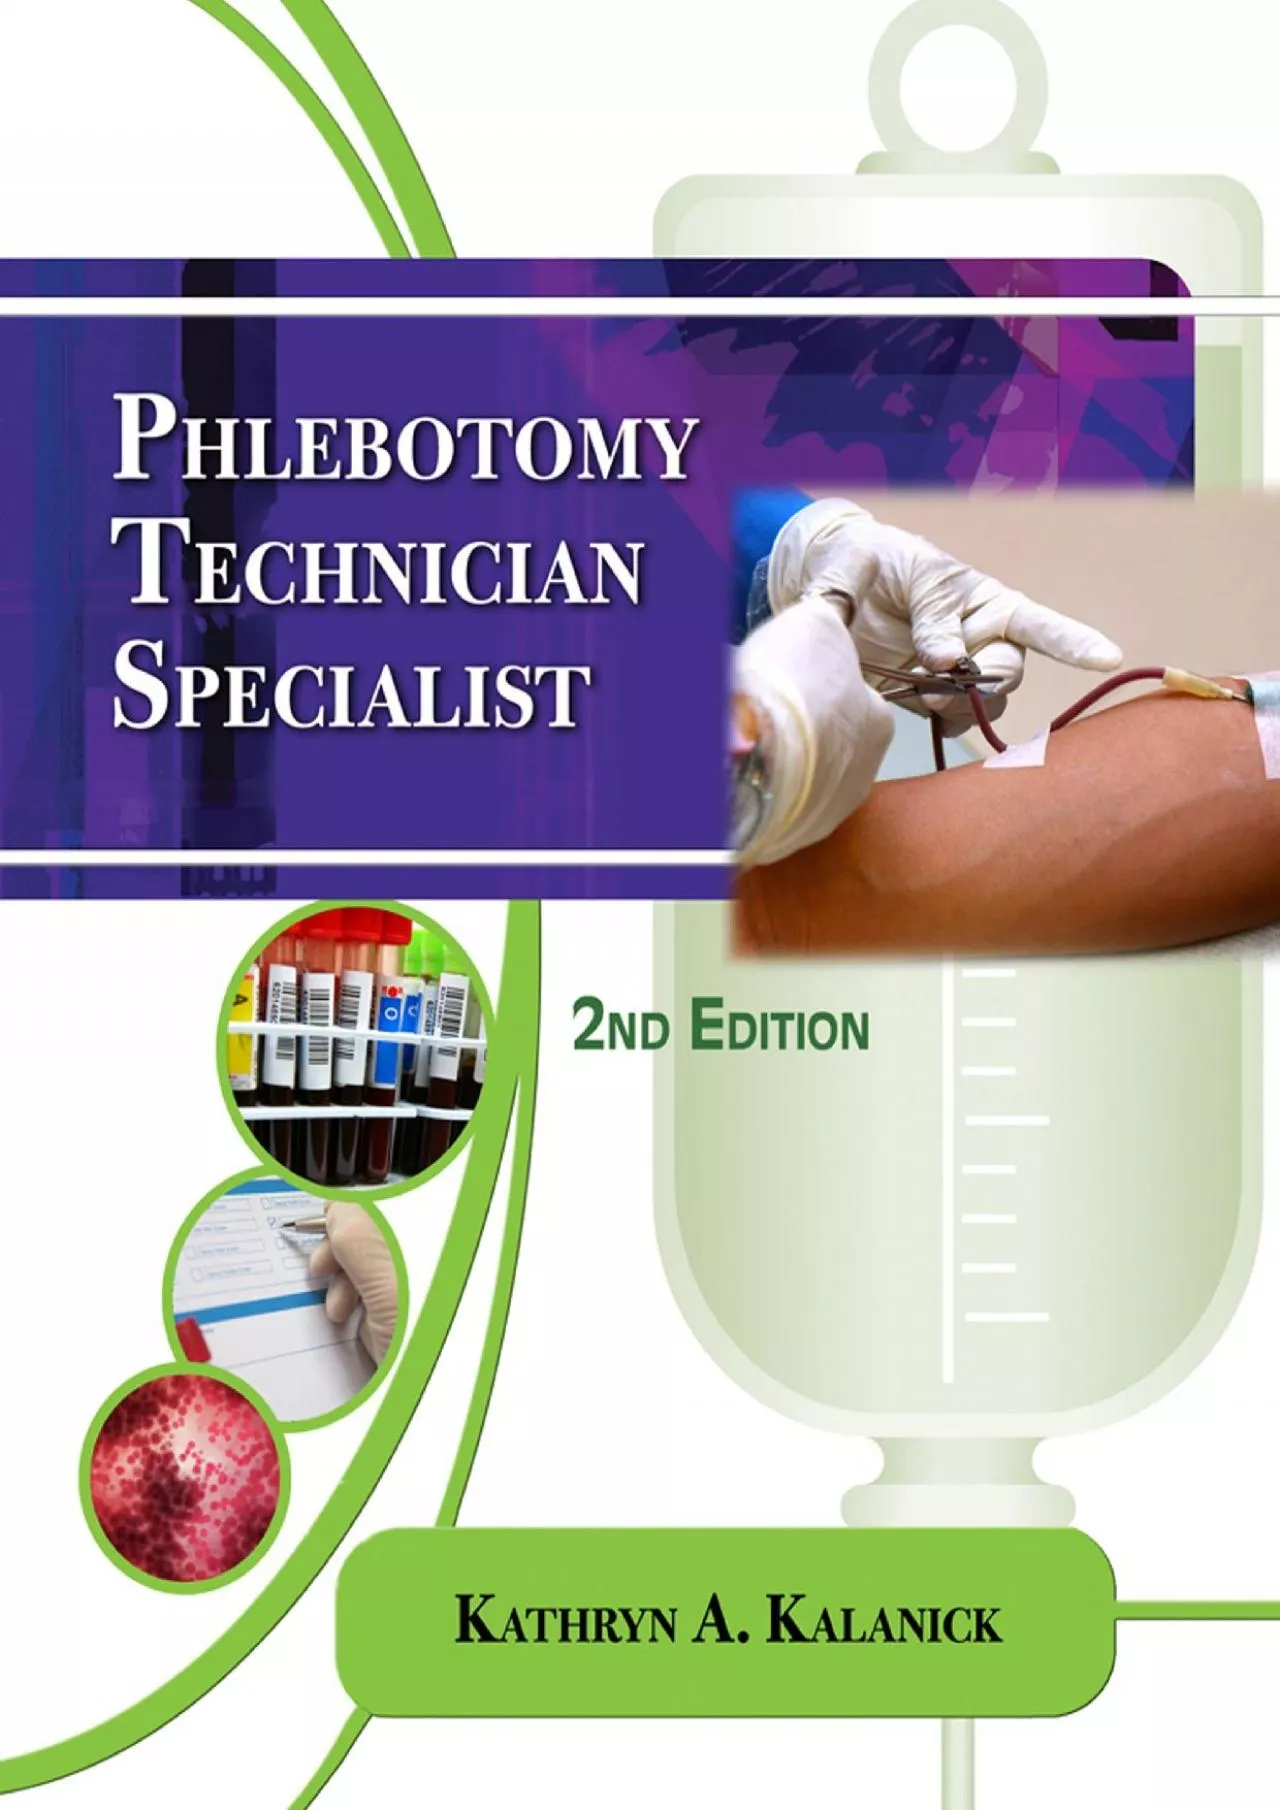 (DOWNLOAD)-Phlebotomy Technician Specialist